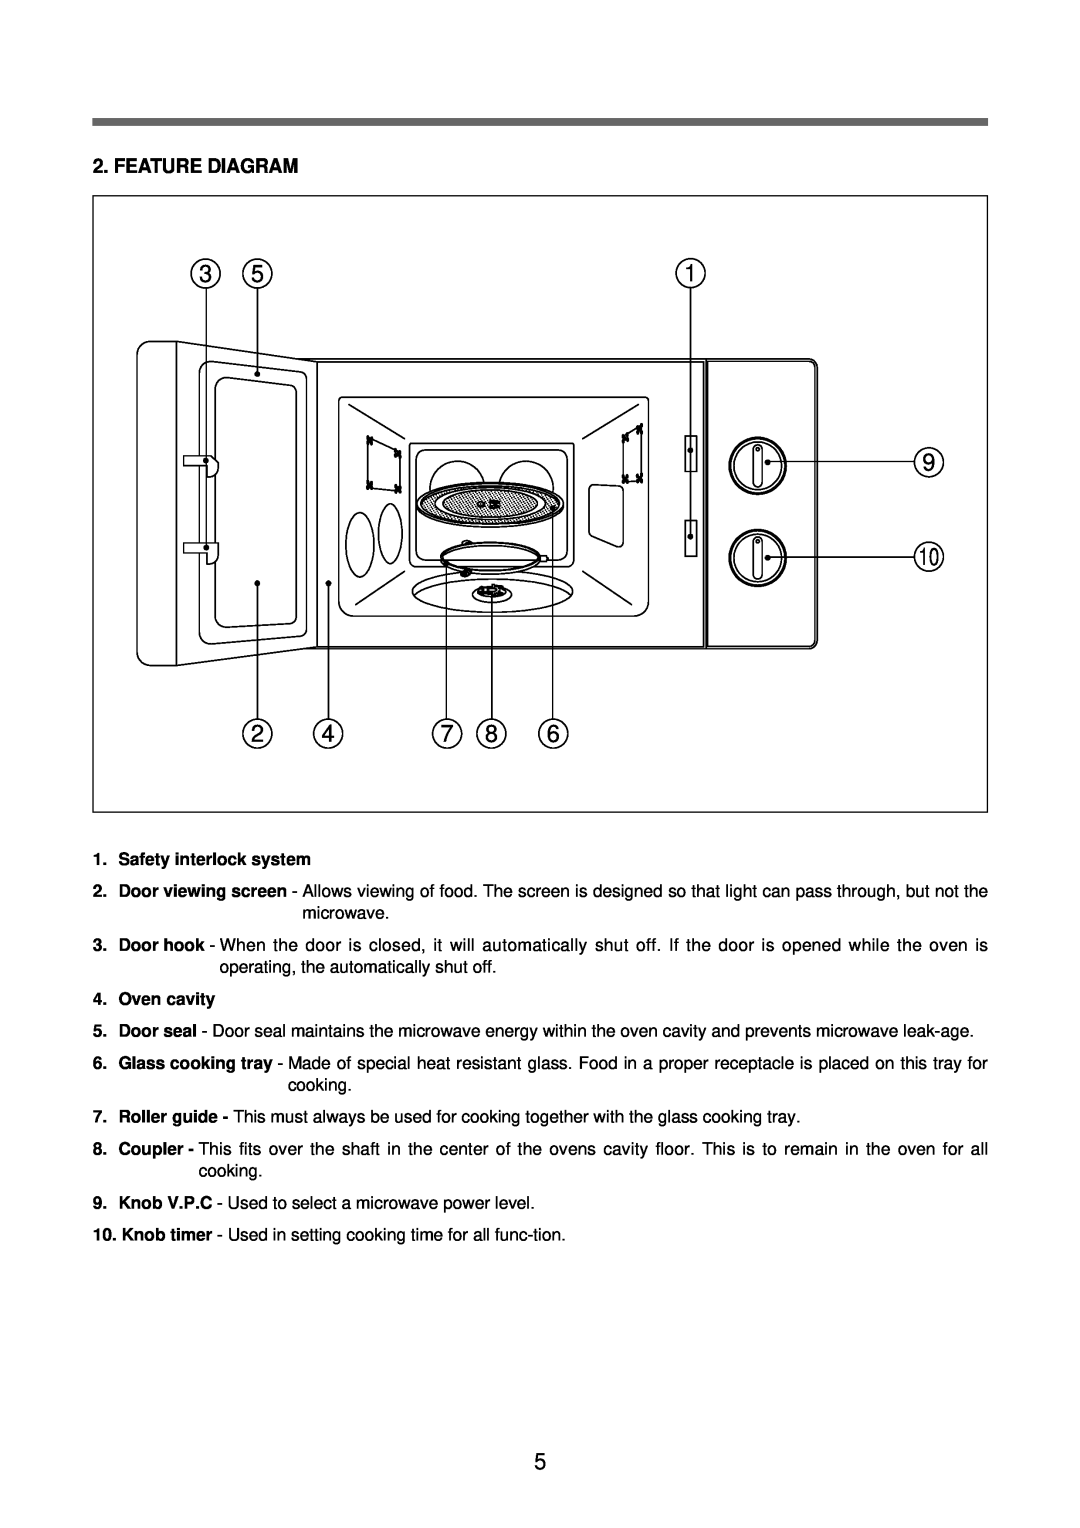 Daewoo Microwave Oven, KOR-6N575S service manual Feature Diagram, Safety interlock system, Oven cavity 